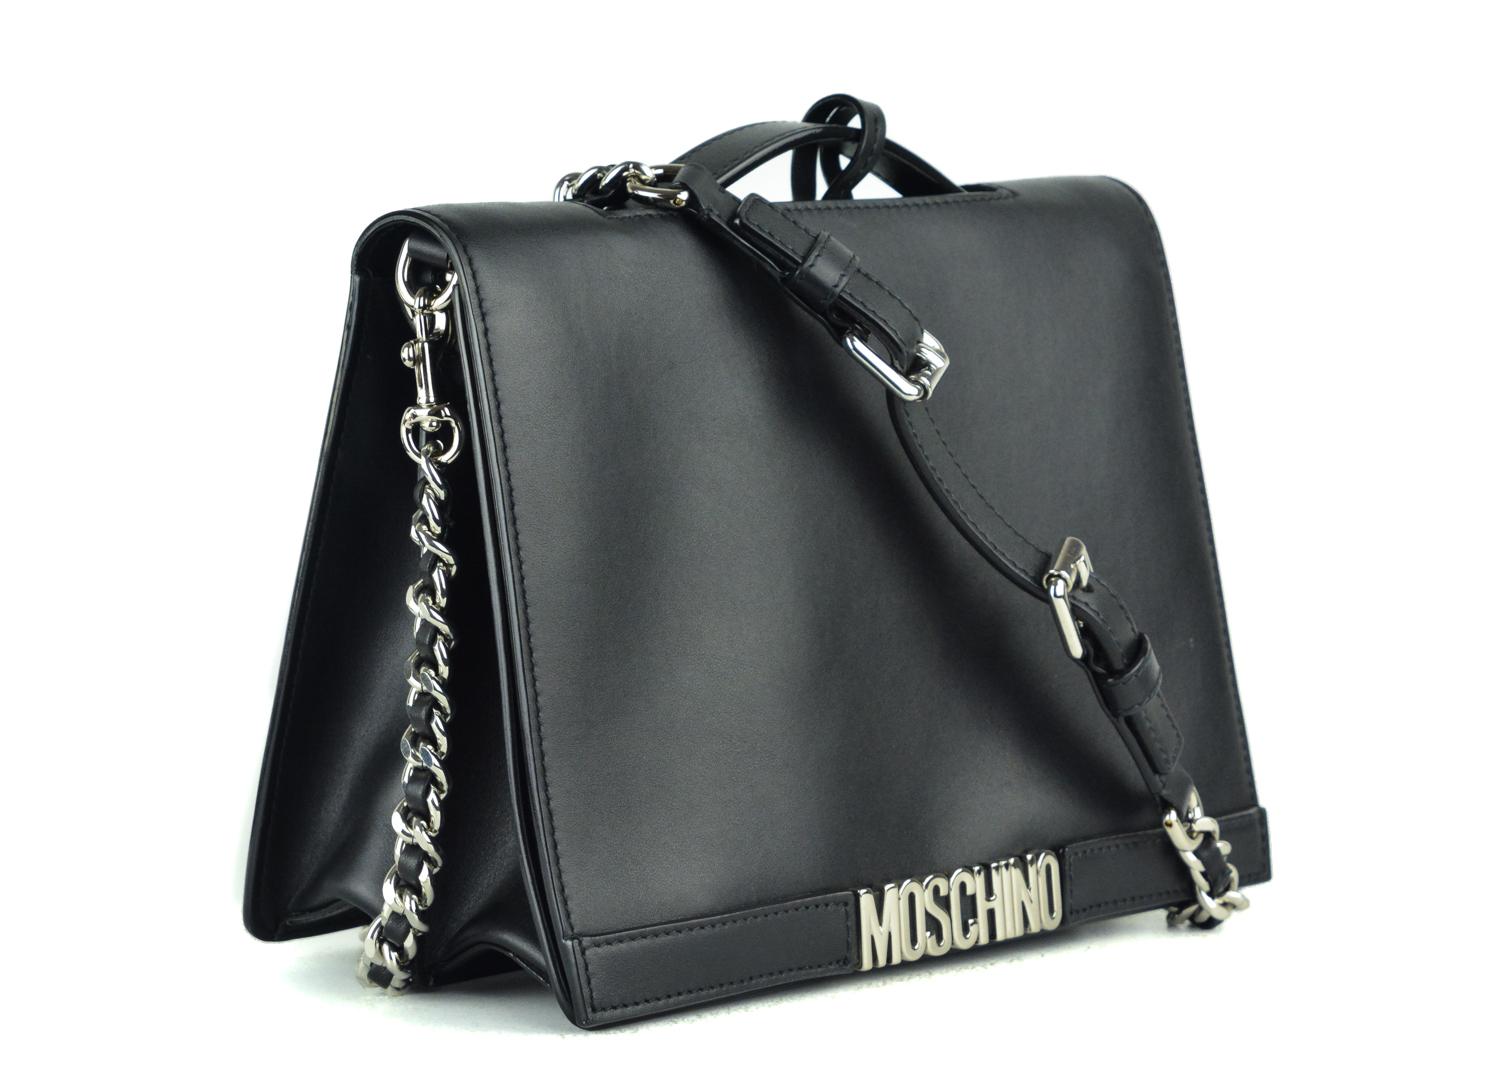 Treat yourself to Moschino's Luxury Shoulder Bag with this all black beauty. This bag features silver flap front logo lettering, interior double compartment for storage, and detachable silver chain strap. You can pair this bag with the perfect all